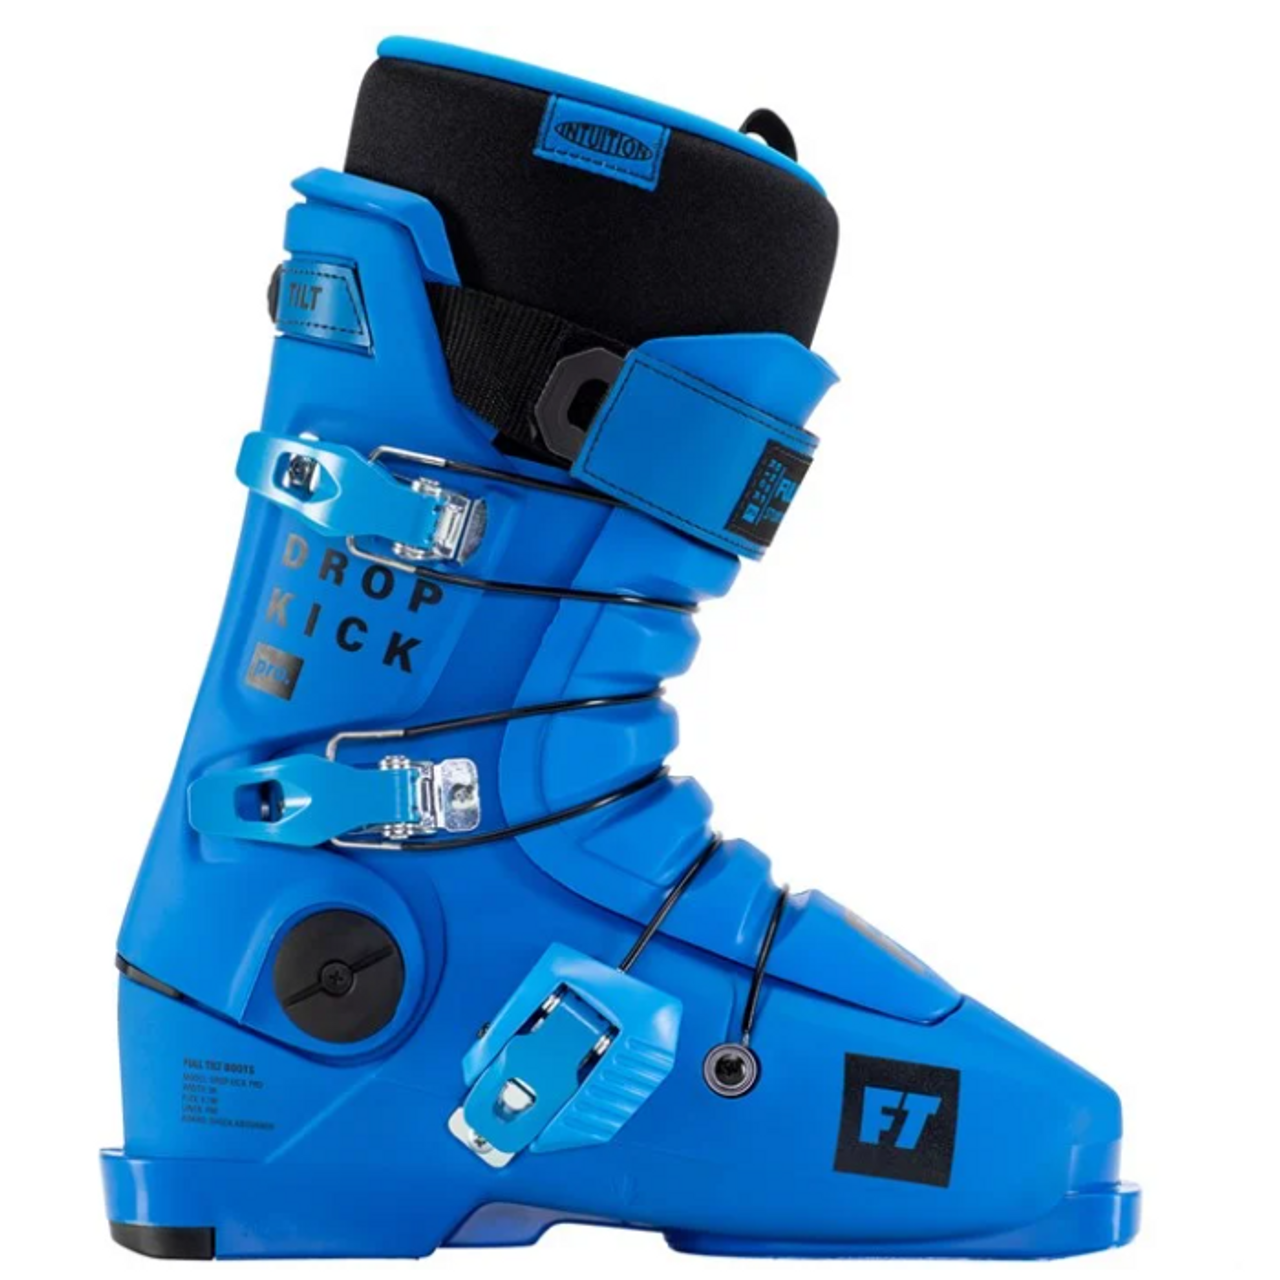 ski boots FULL TILT KONFLICT SERIES, active shock absorber, canting,  green/black ( TOP condition ) 